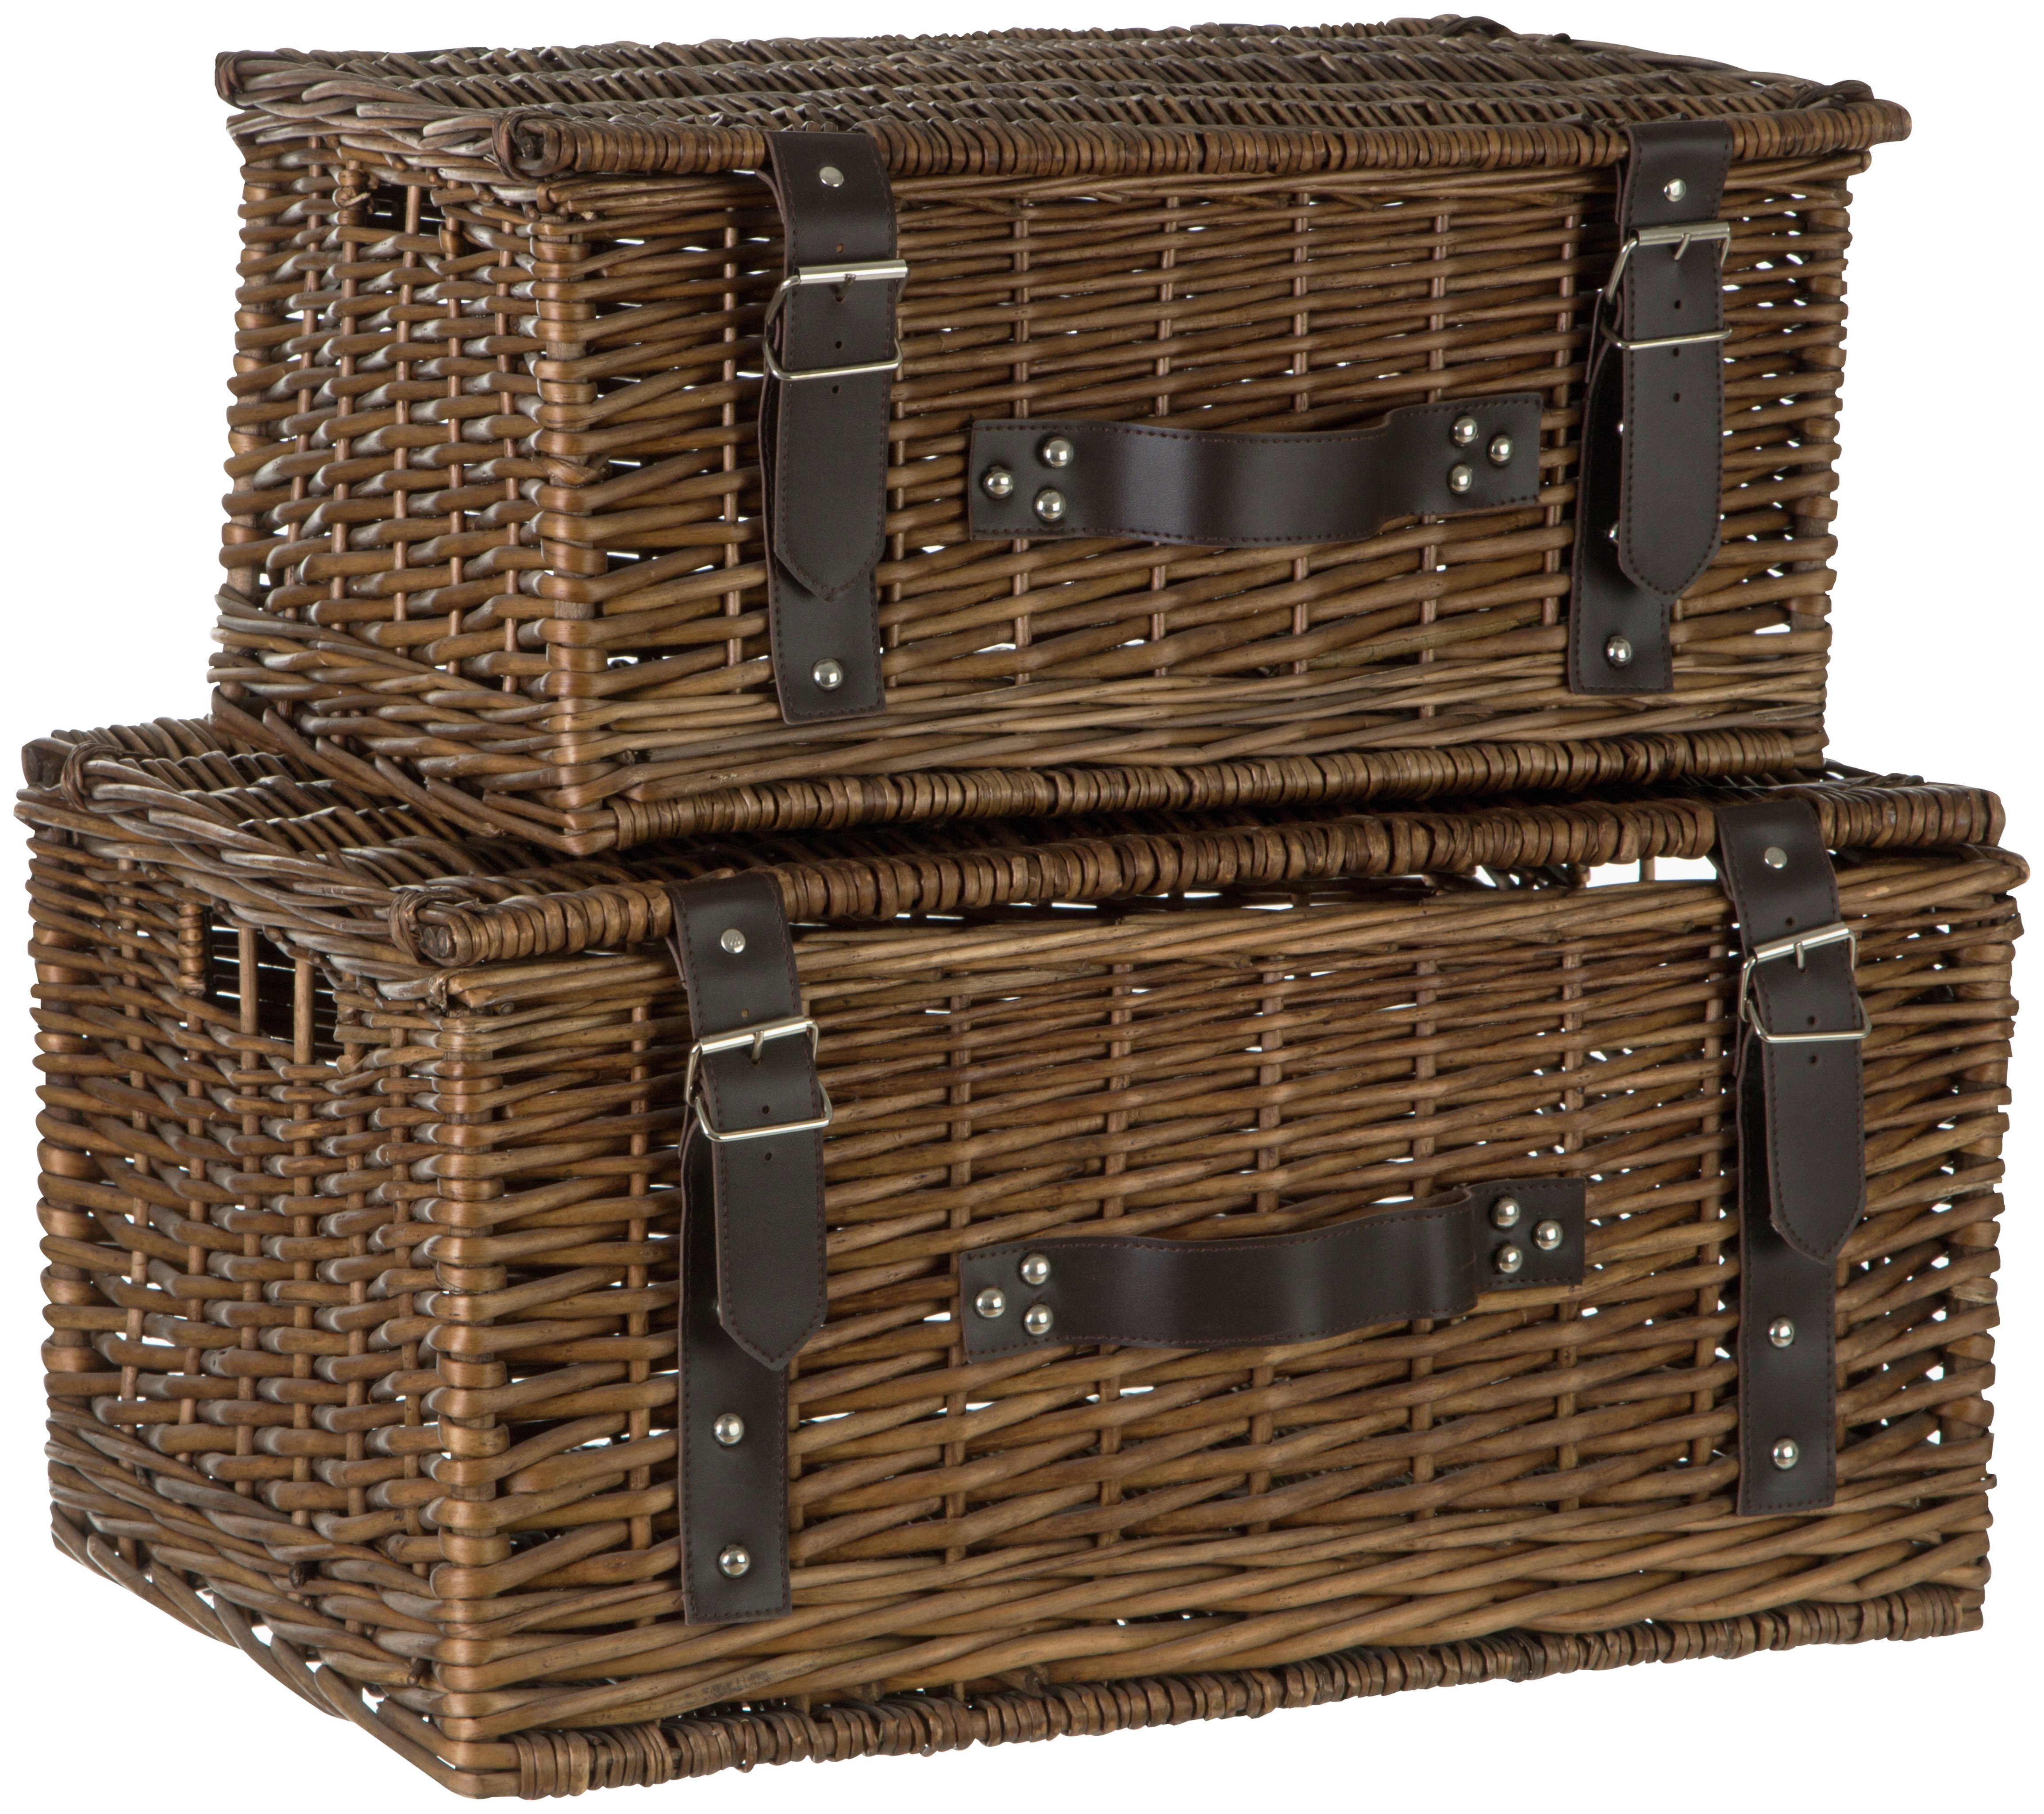 Premier Housewares Set of 2 Willow Leather Baskets -Natural at Argos review